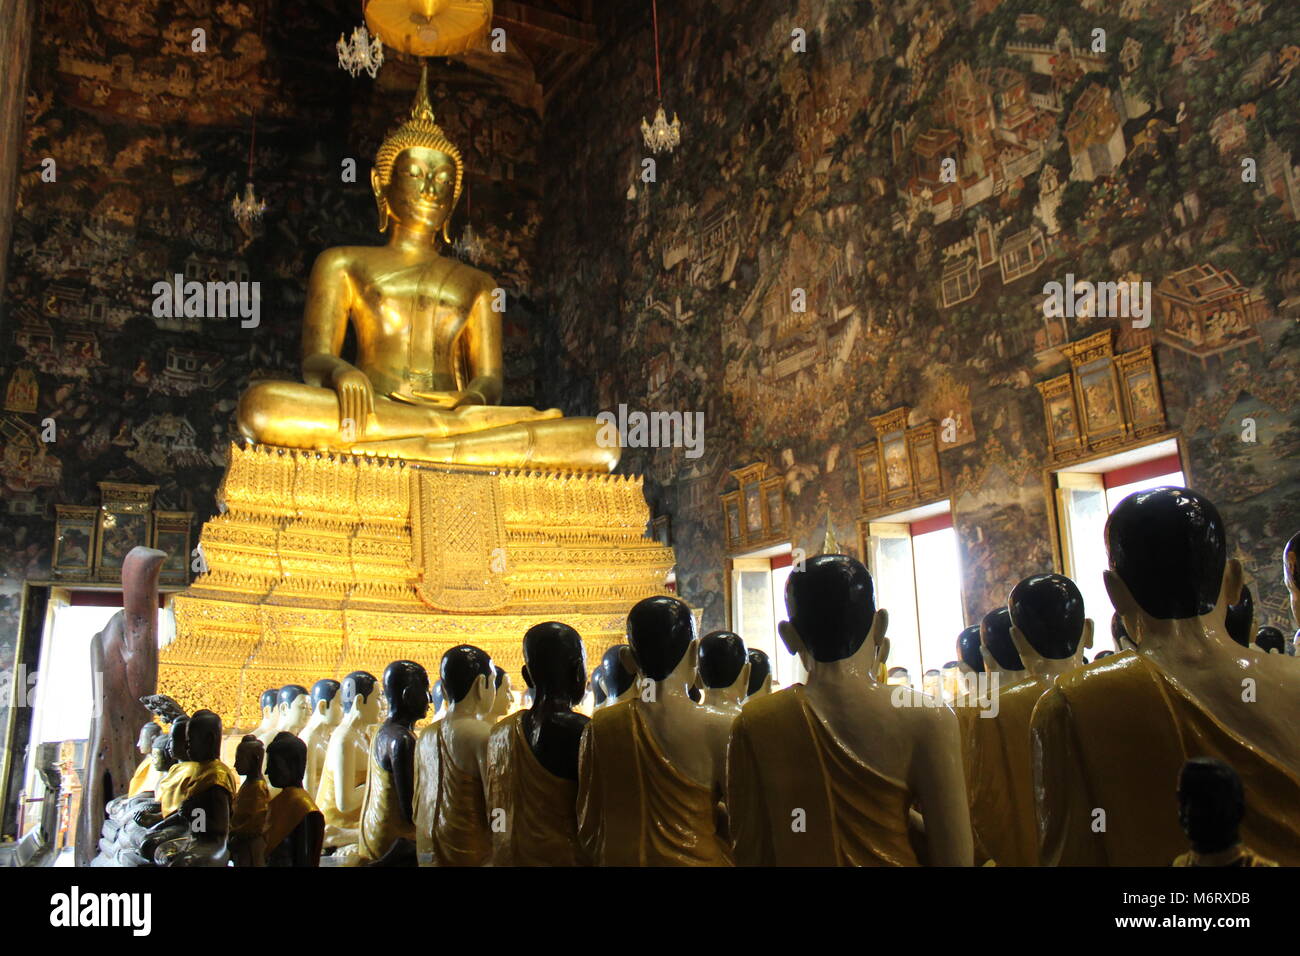 Wat Suthat Temple Celebrating Magha Puja Day, where 1540 Buddhist monks gathered to hear Buddha's teachings. Located in Bangkok, Thailand. Stock Photo